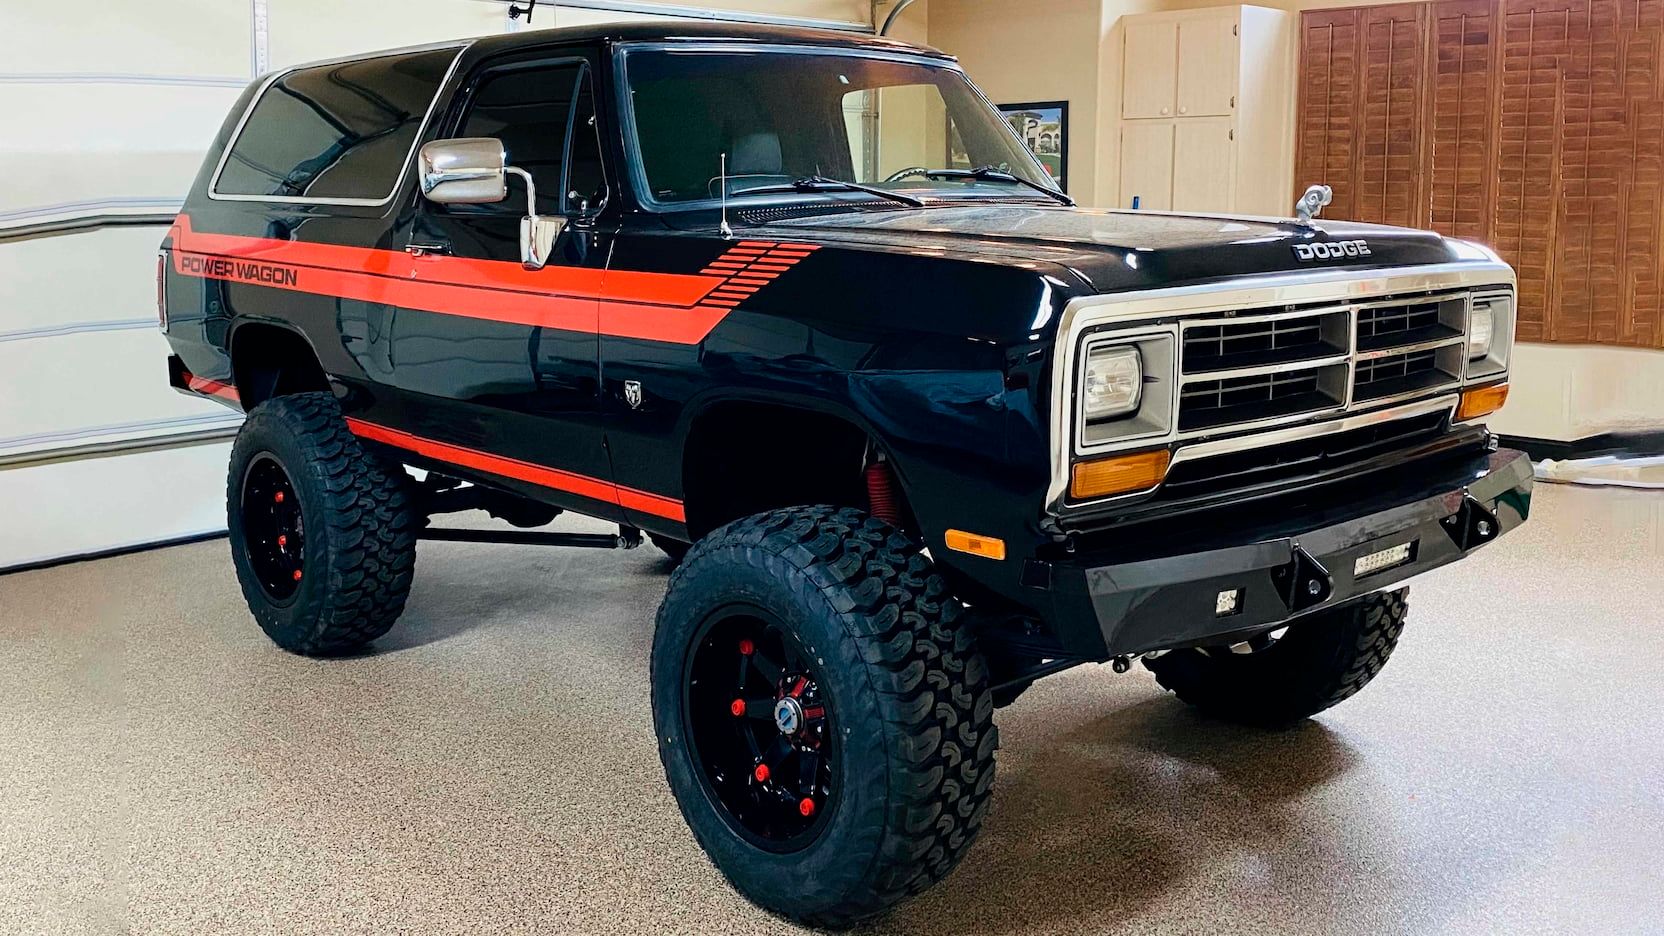 A parked 1986 Dodge Ramcharger